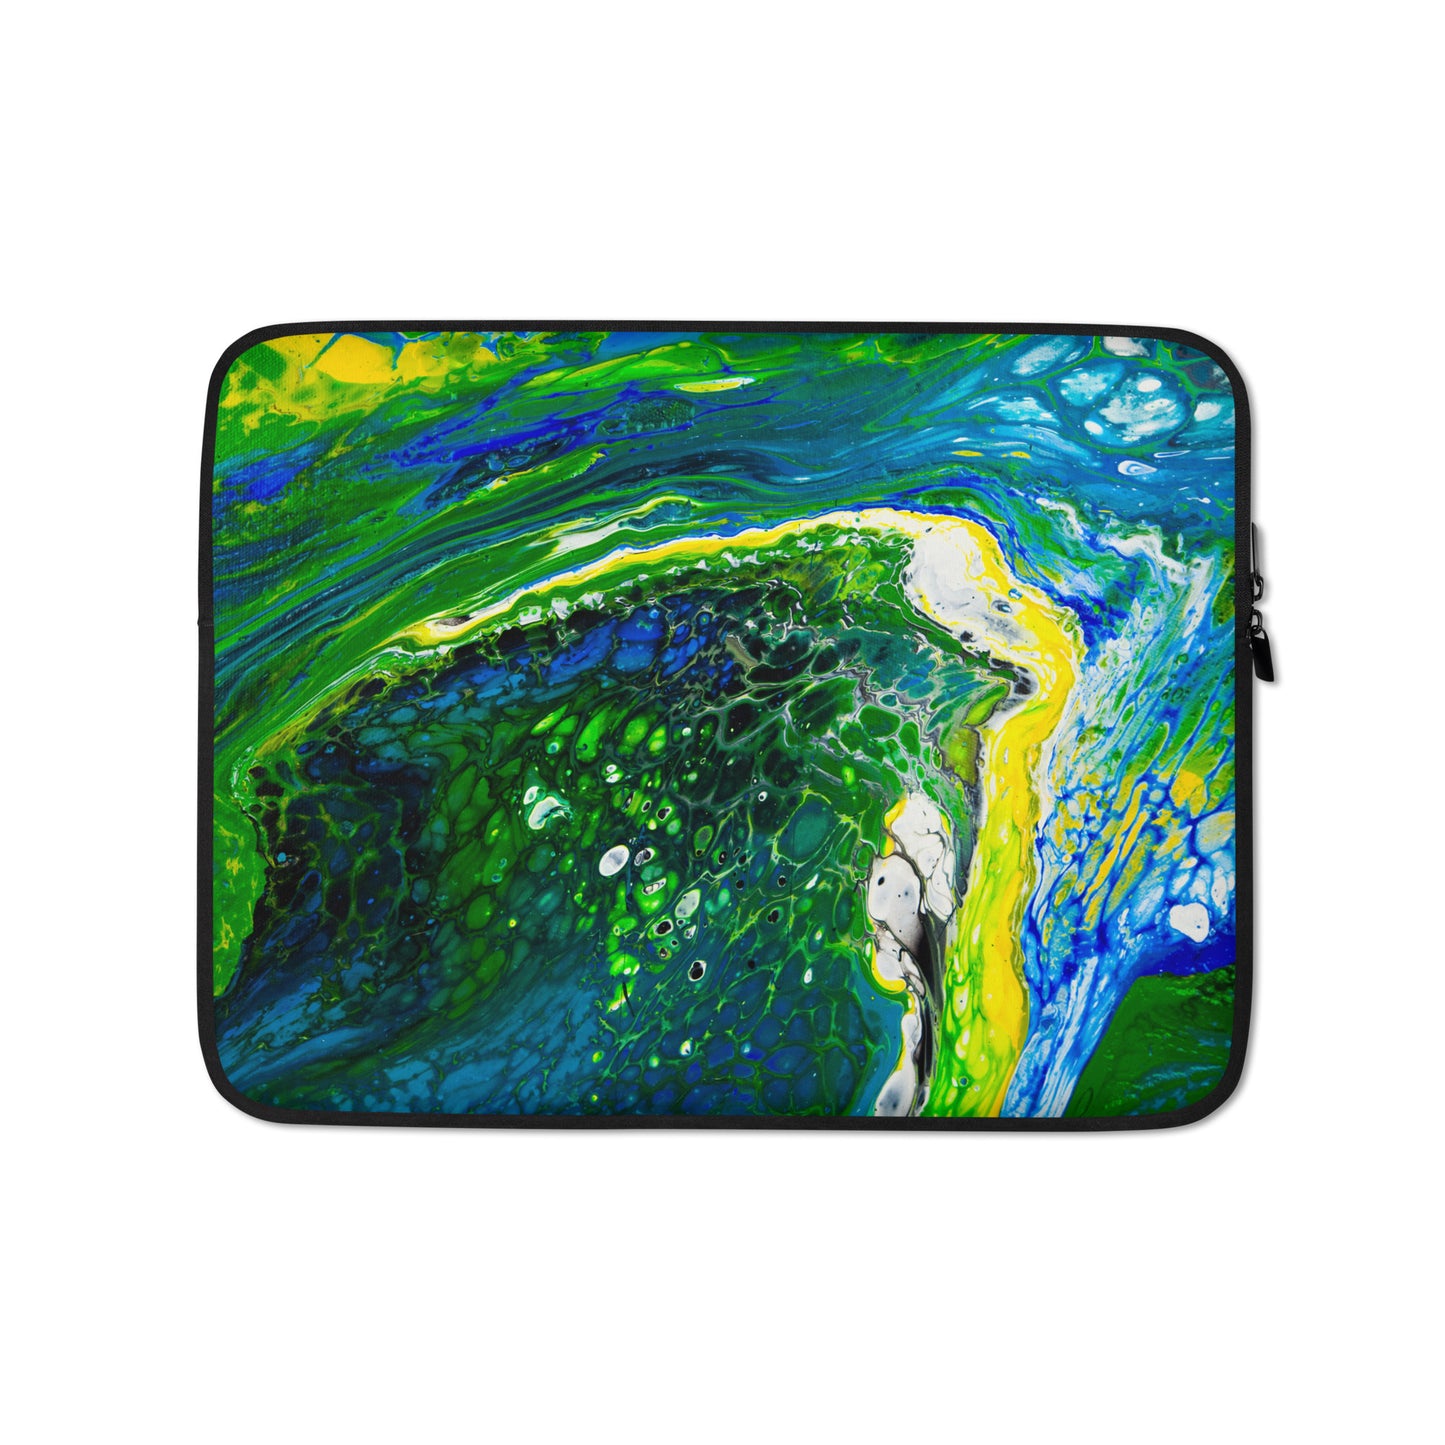 NightOwl Studio Padded Laptop Sleeve with Faux Fur Lining, 13 and 15 Inch Covers for Portable Computers and Large Tablets, Slim and Portable Neoprene for Work, Travel, or Gaming, Green Stream